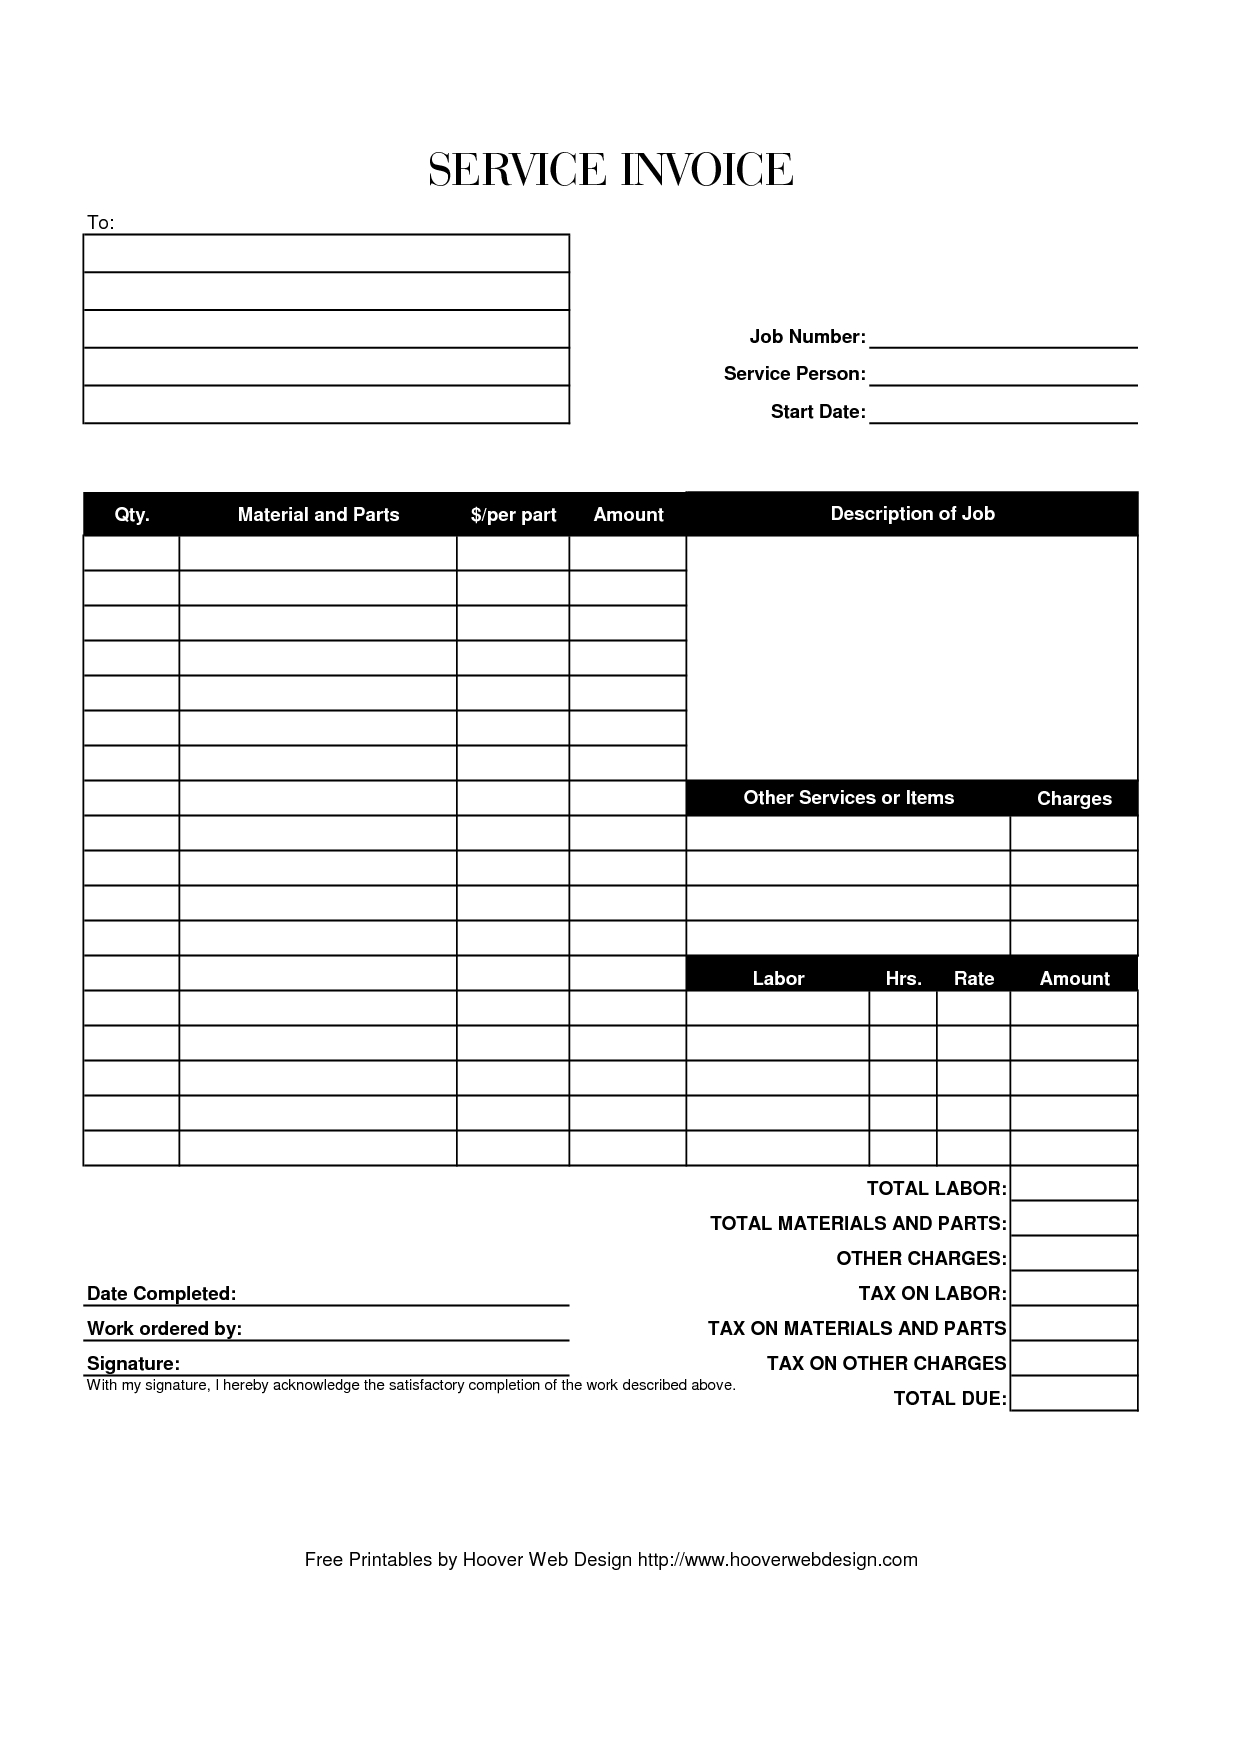 10 printable invoice templates and tips to create excel invoice free printable invoice templates download